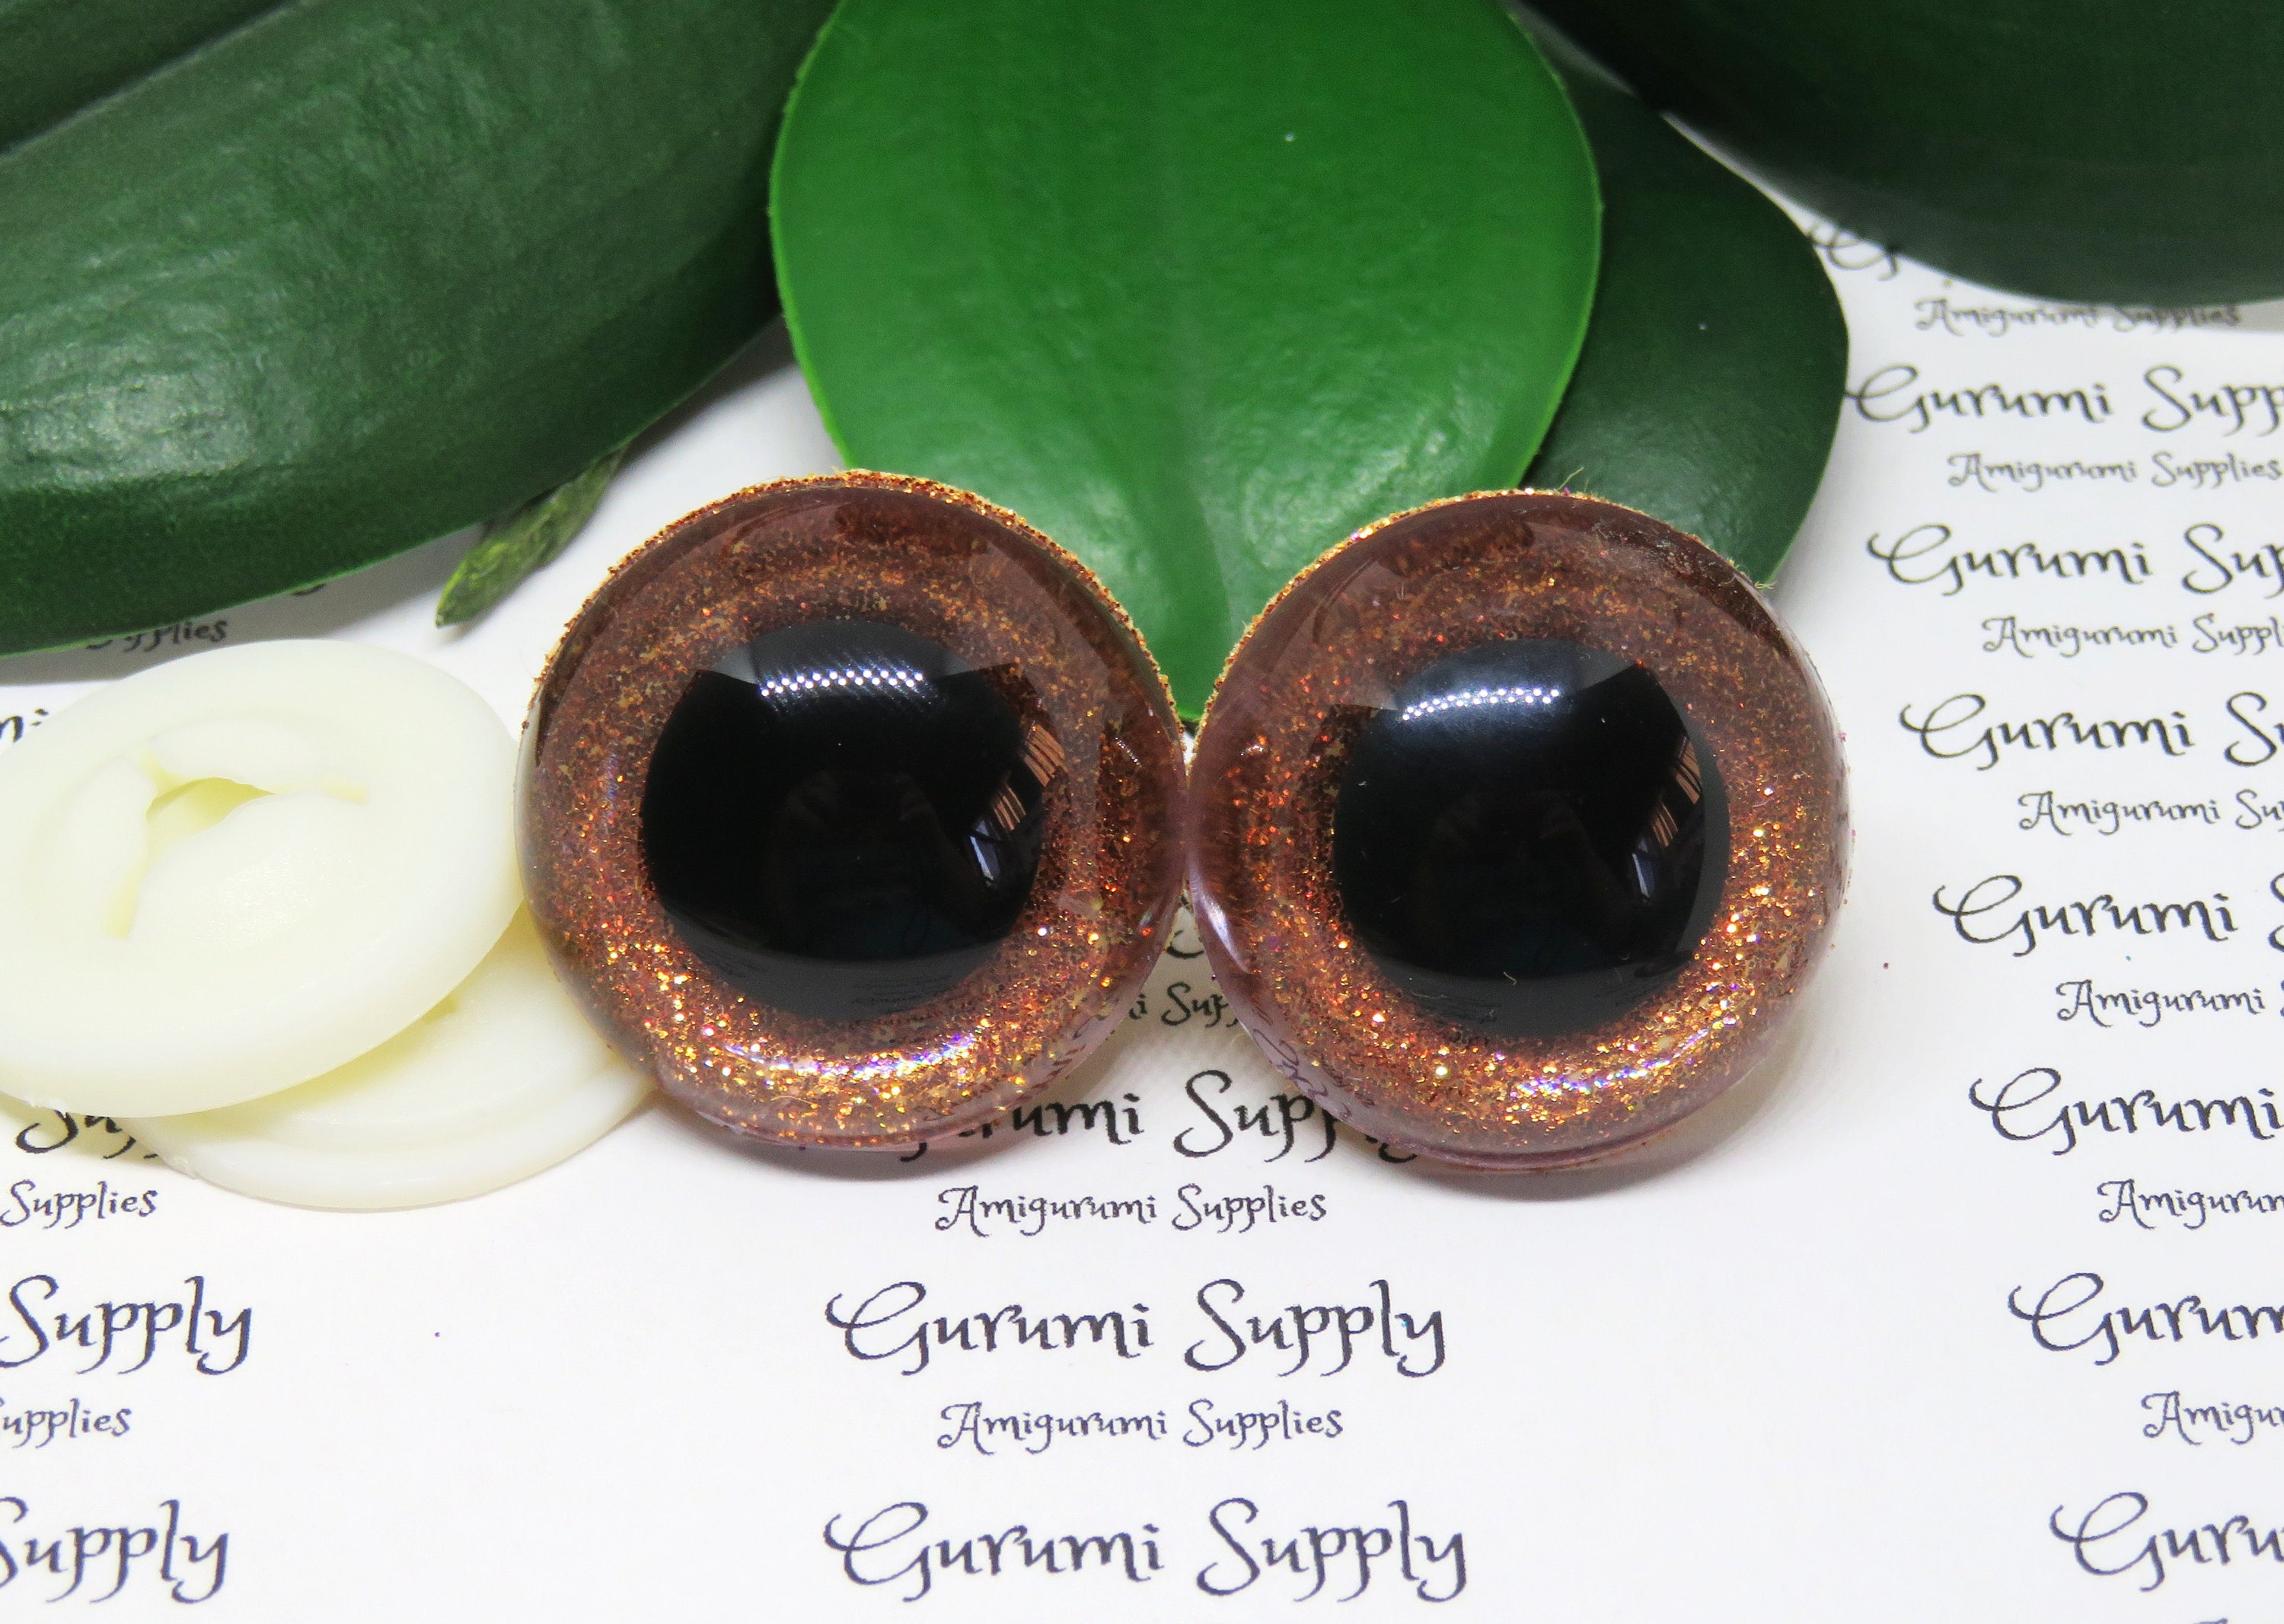 20mm Clear Trapezoid Plastic Safety Eyes with a Brown Glitter Non-Woven  Slip Iris and Washers: 1 Pair - Dolls / Amigurumi / Animal / Toys